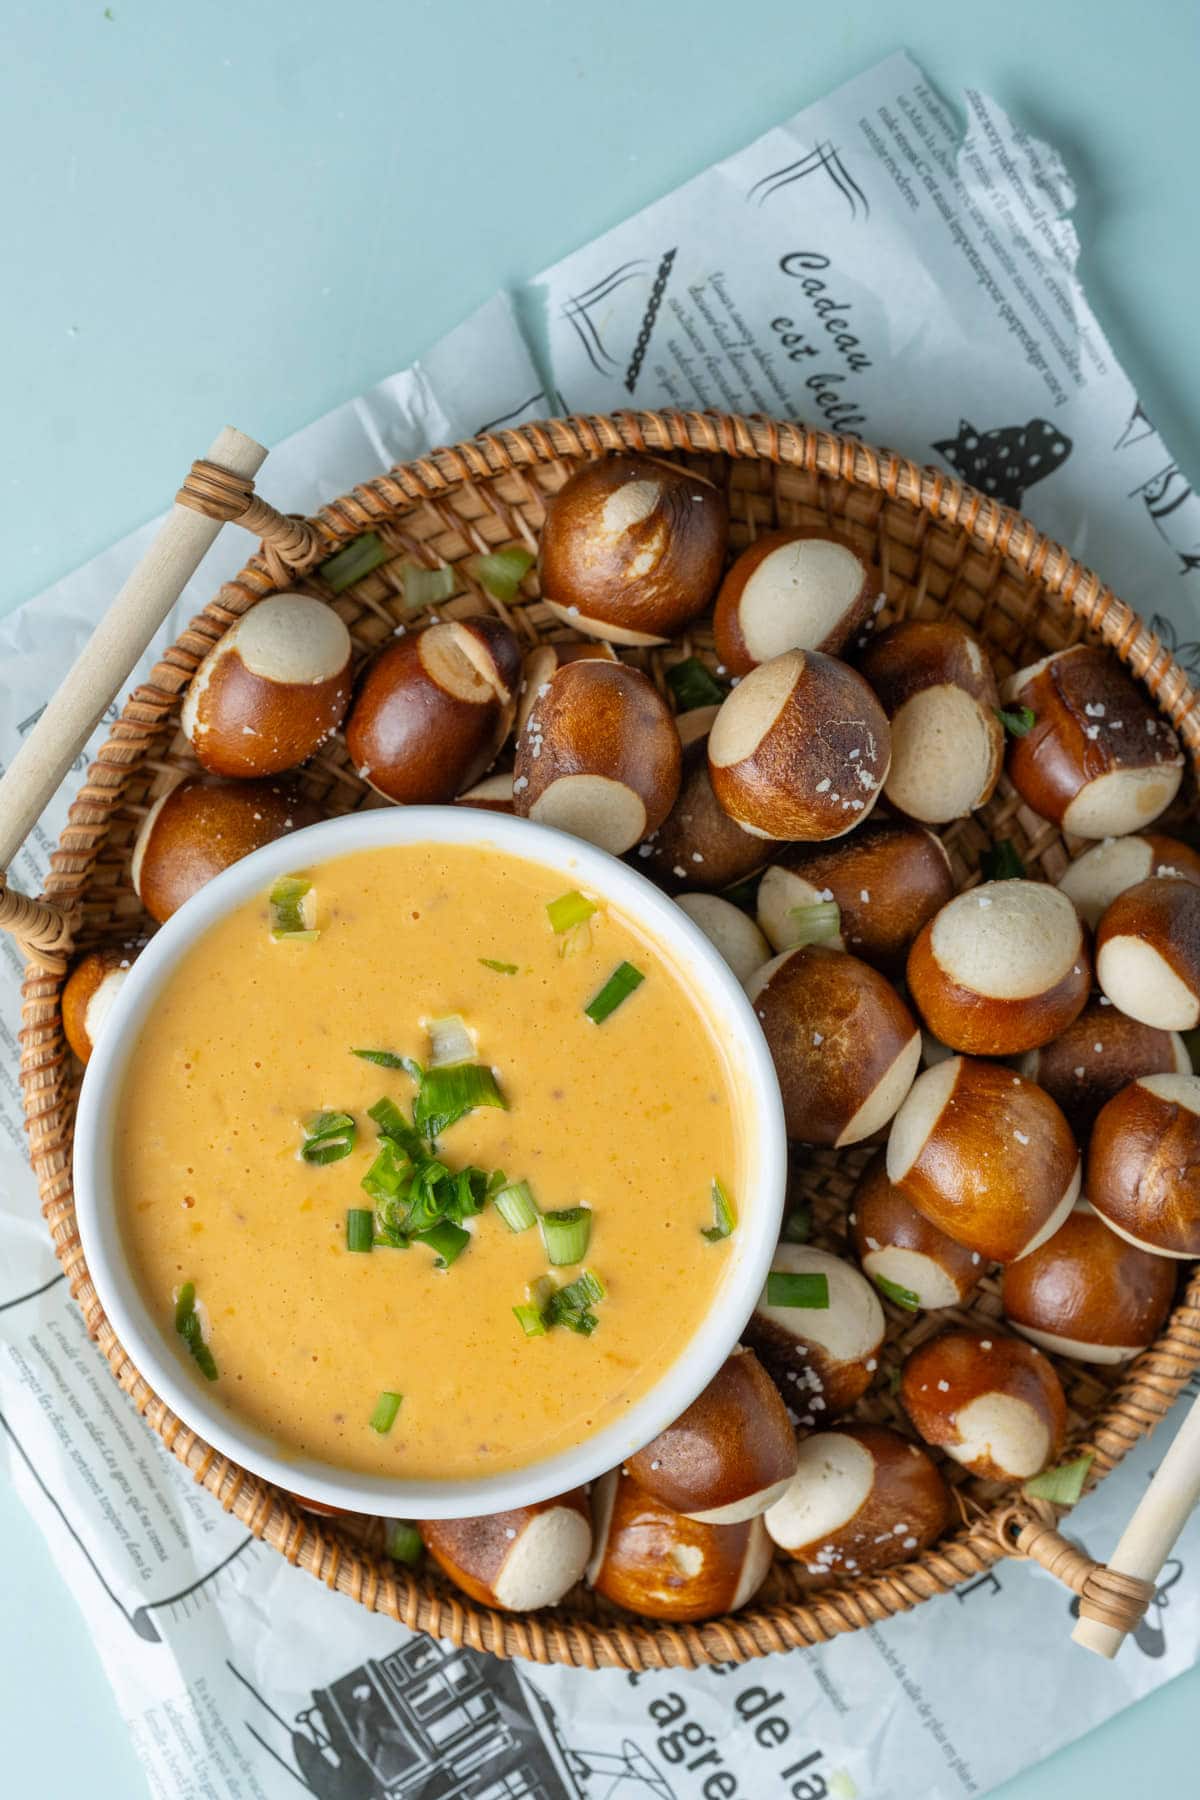 Basket of pretzel bites served with a bowl of beer cheese.